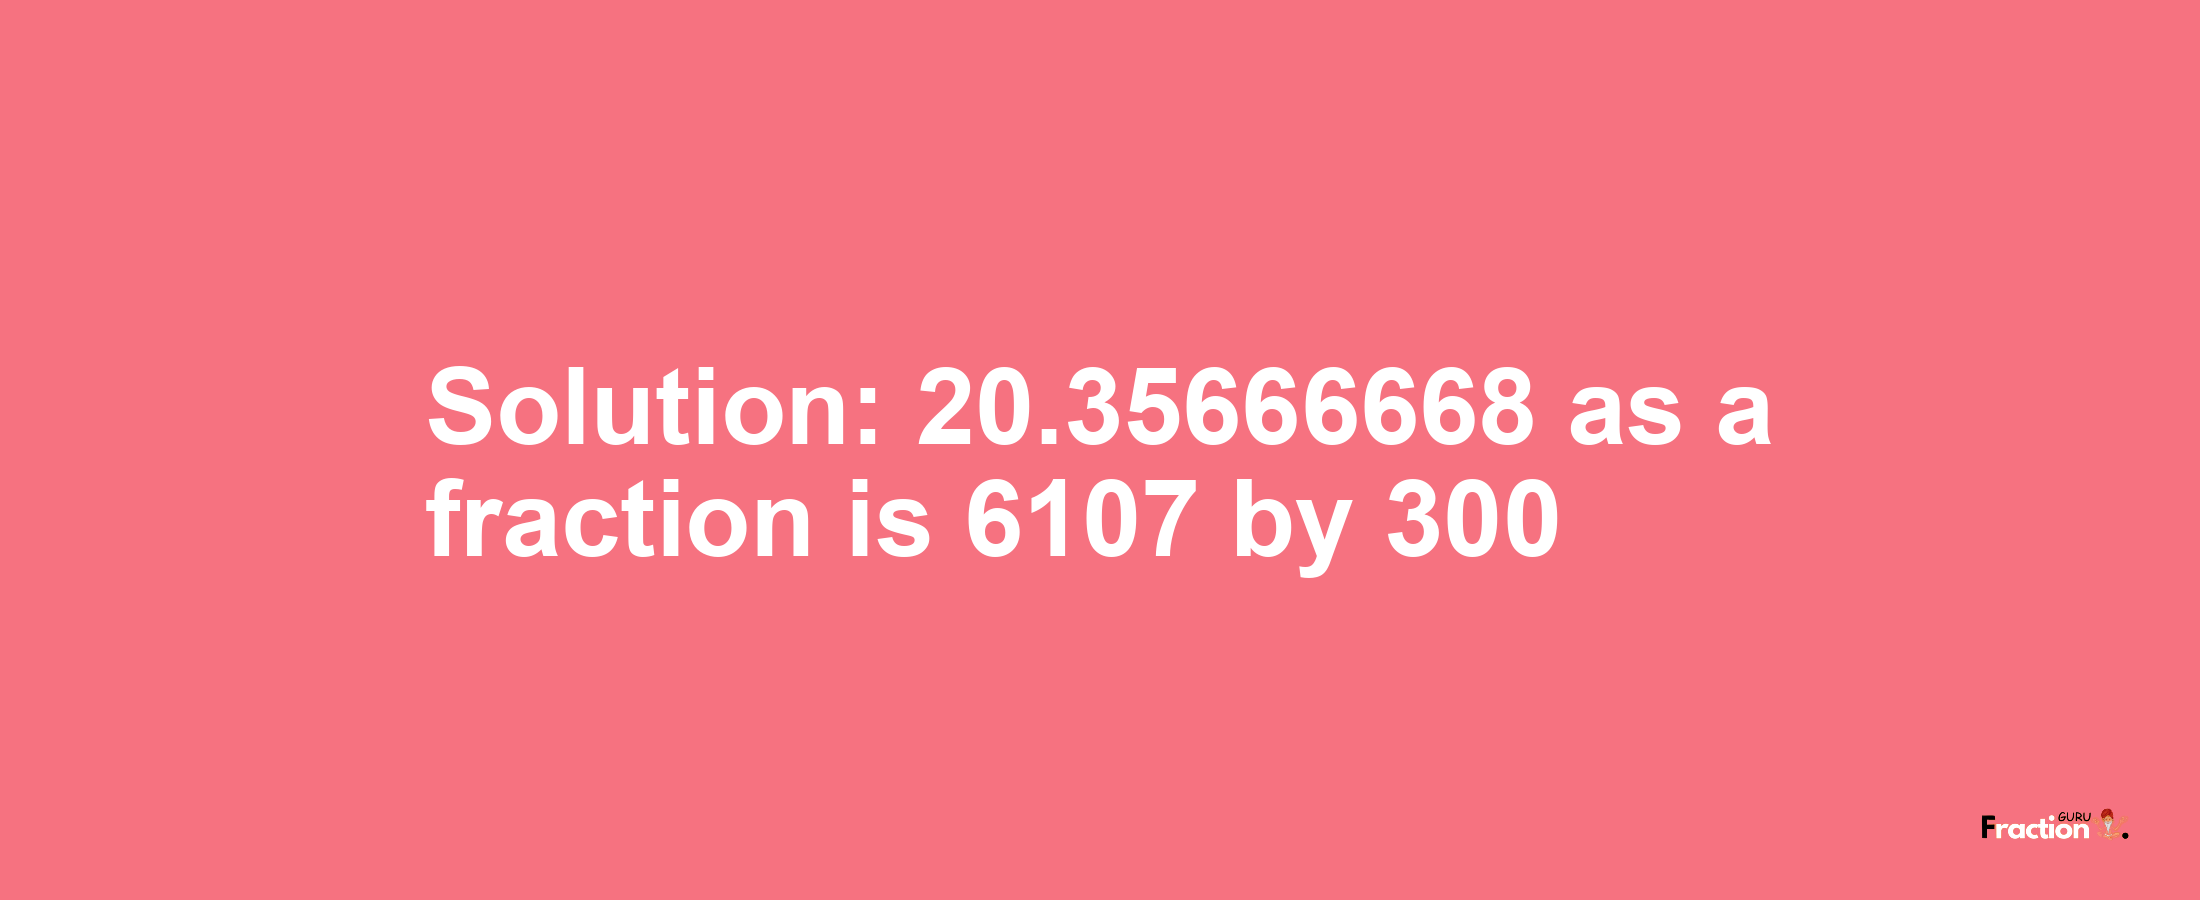 Solution:20.35666668 as a fraction is 6107/300